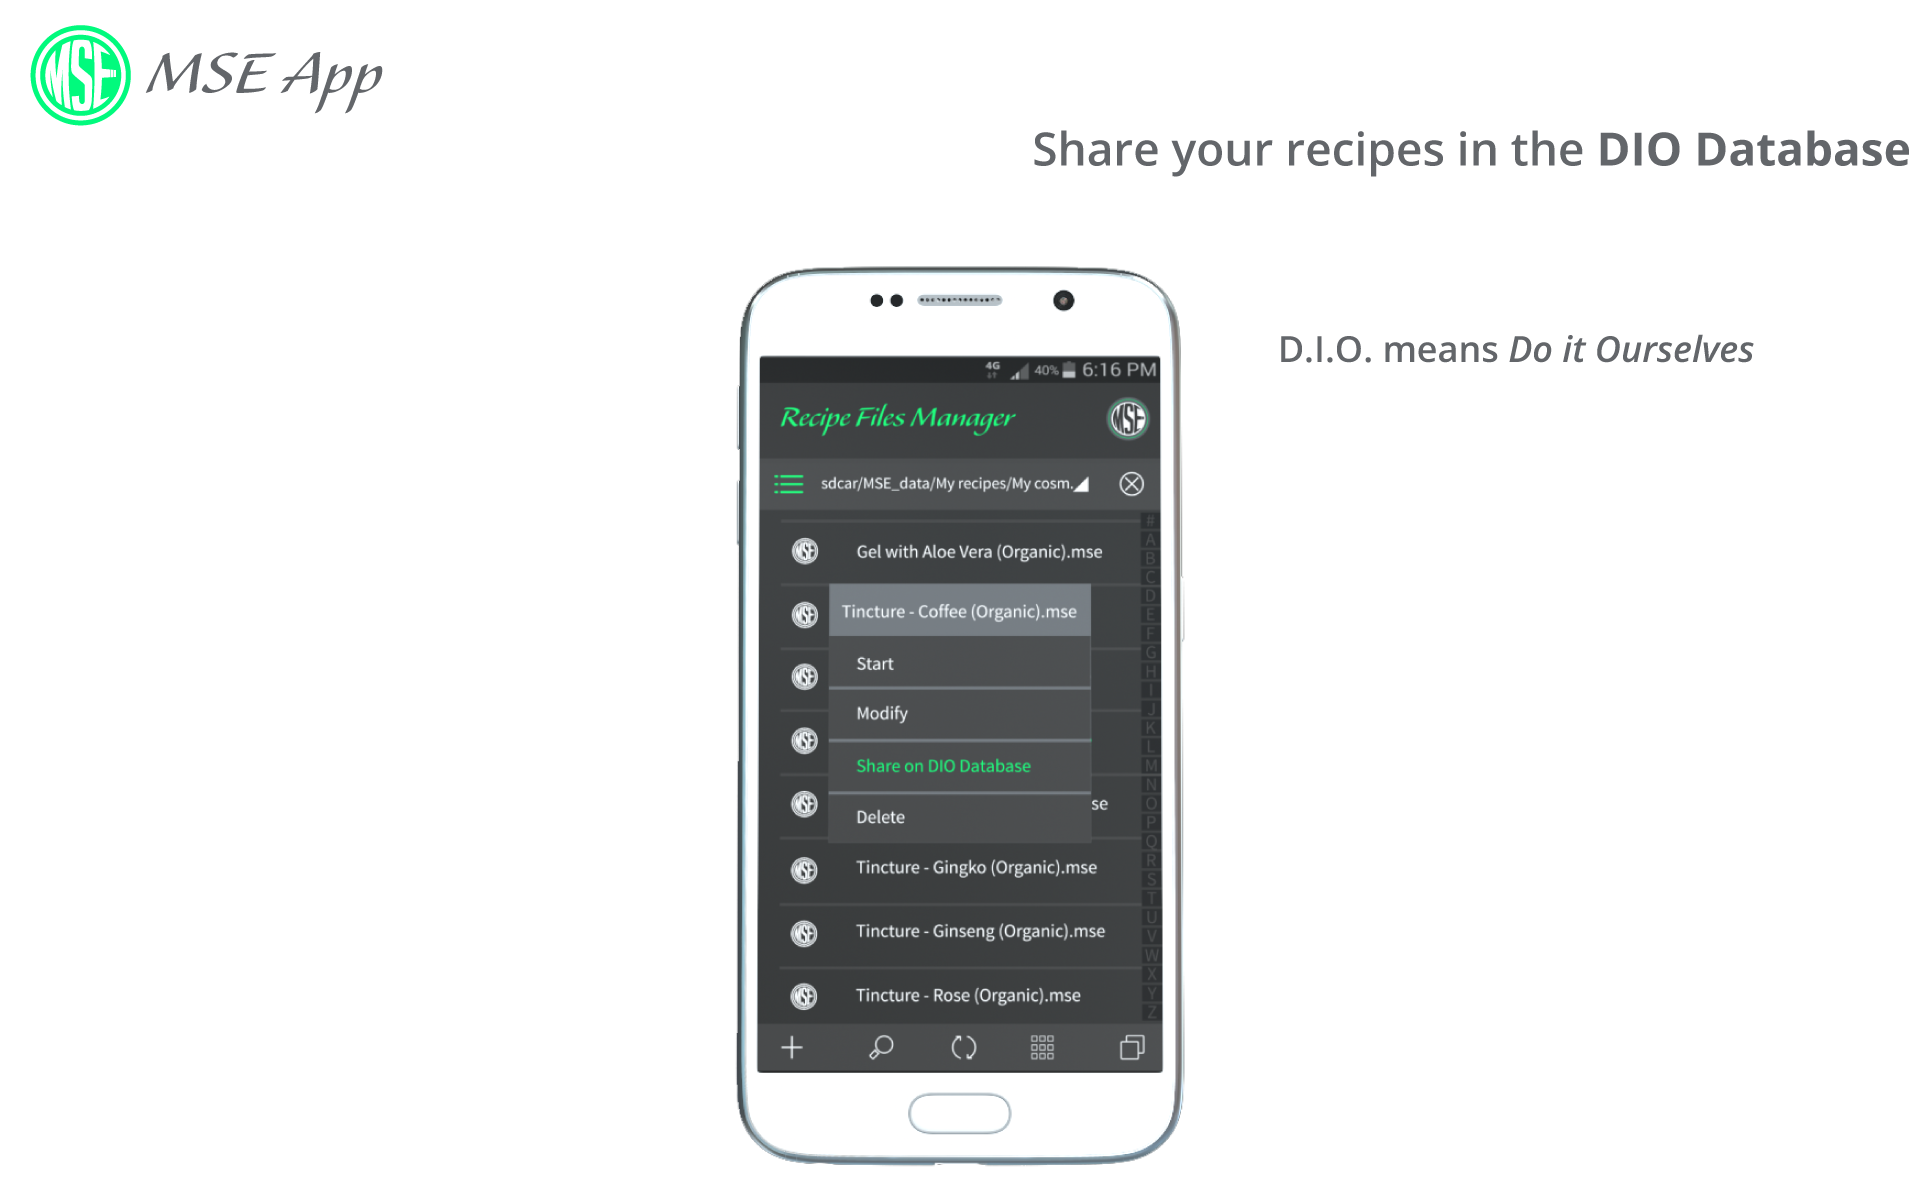 Share easily your recipes